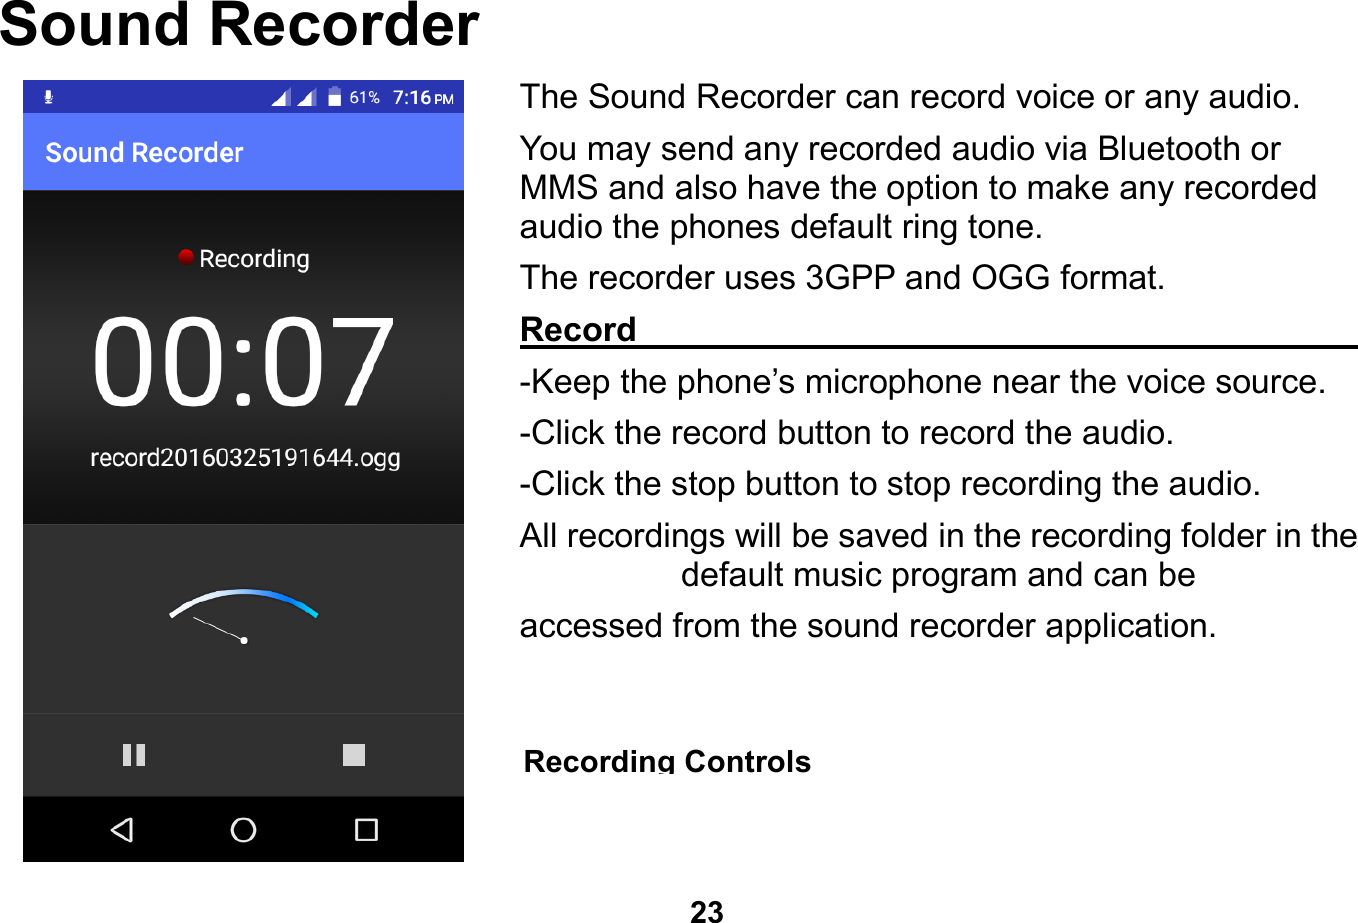   23  Sound Recorder The Sound Recorder can record voice or any audio.   You may send any recorded audio via Bluetooth or MMS and also have the option to make any recorded audio the phones default ring tone. The recorder uses 3GPP and OGG format. Record                                                        -Keep the phone’s microphone near the voice source. -Click the record button to record the audio. -Click the stop button to stop recording the audio. All recordings will be saved in the recording folder in the default music program and can be   accessed from the sound recorder application.    Recording Controls 